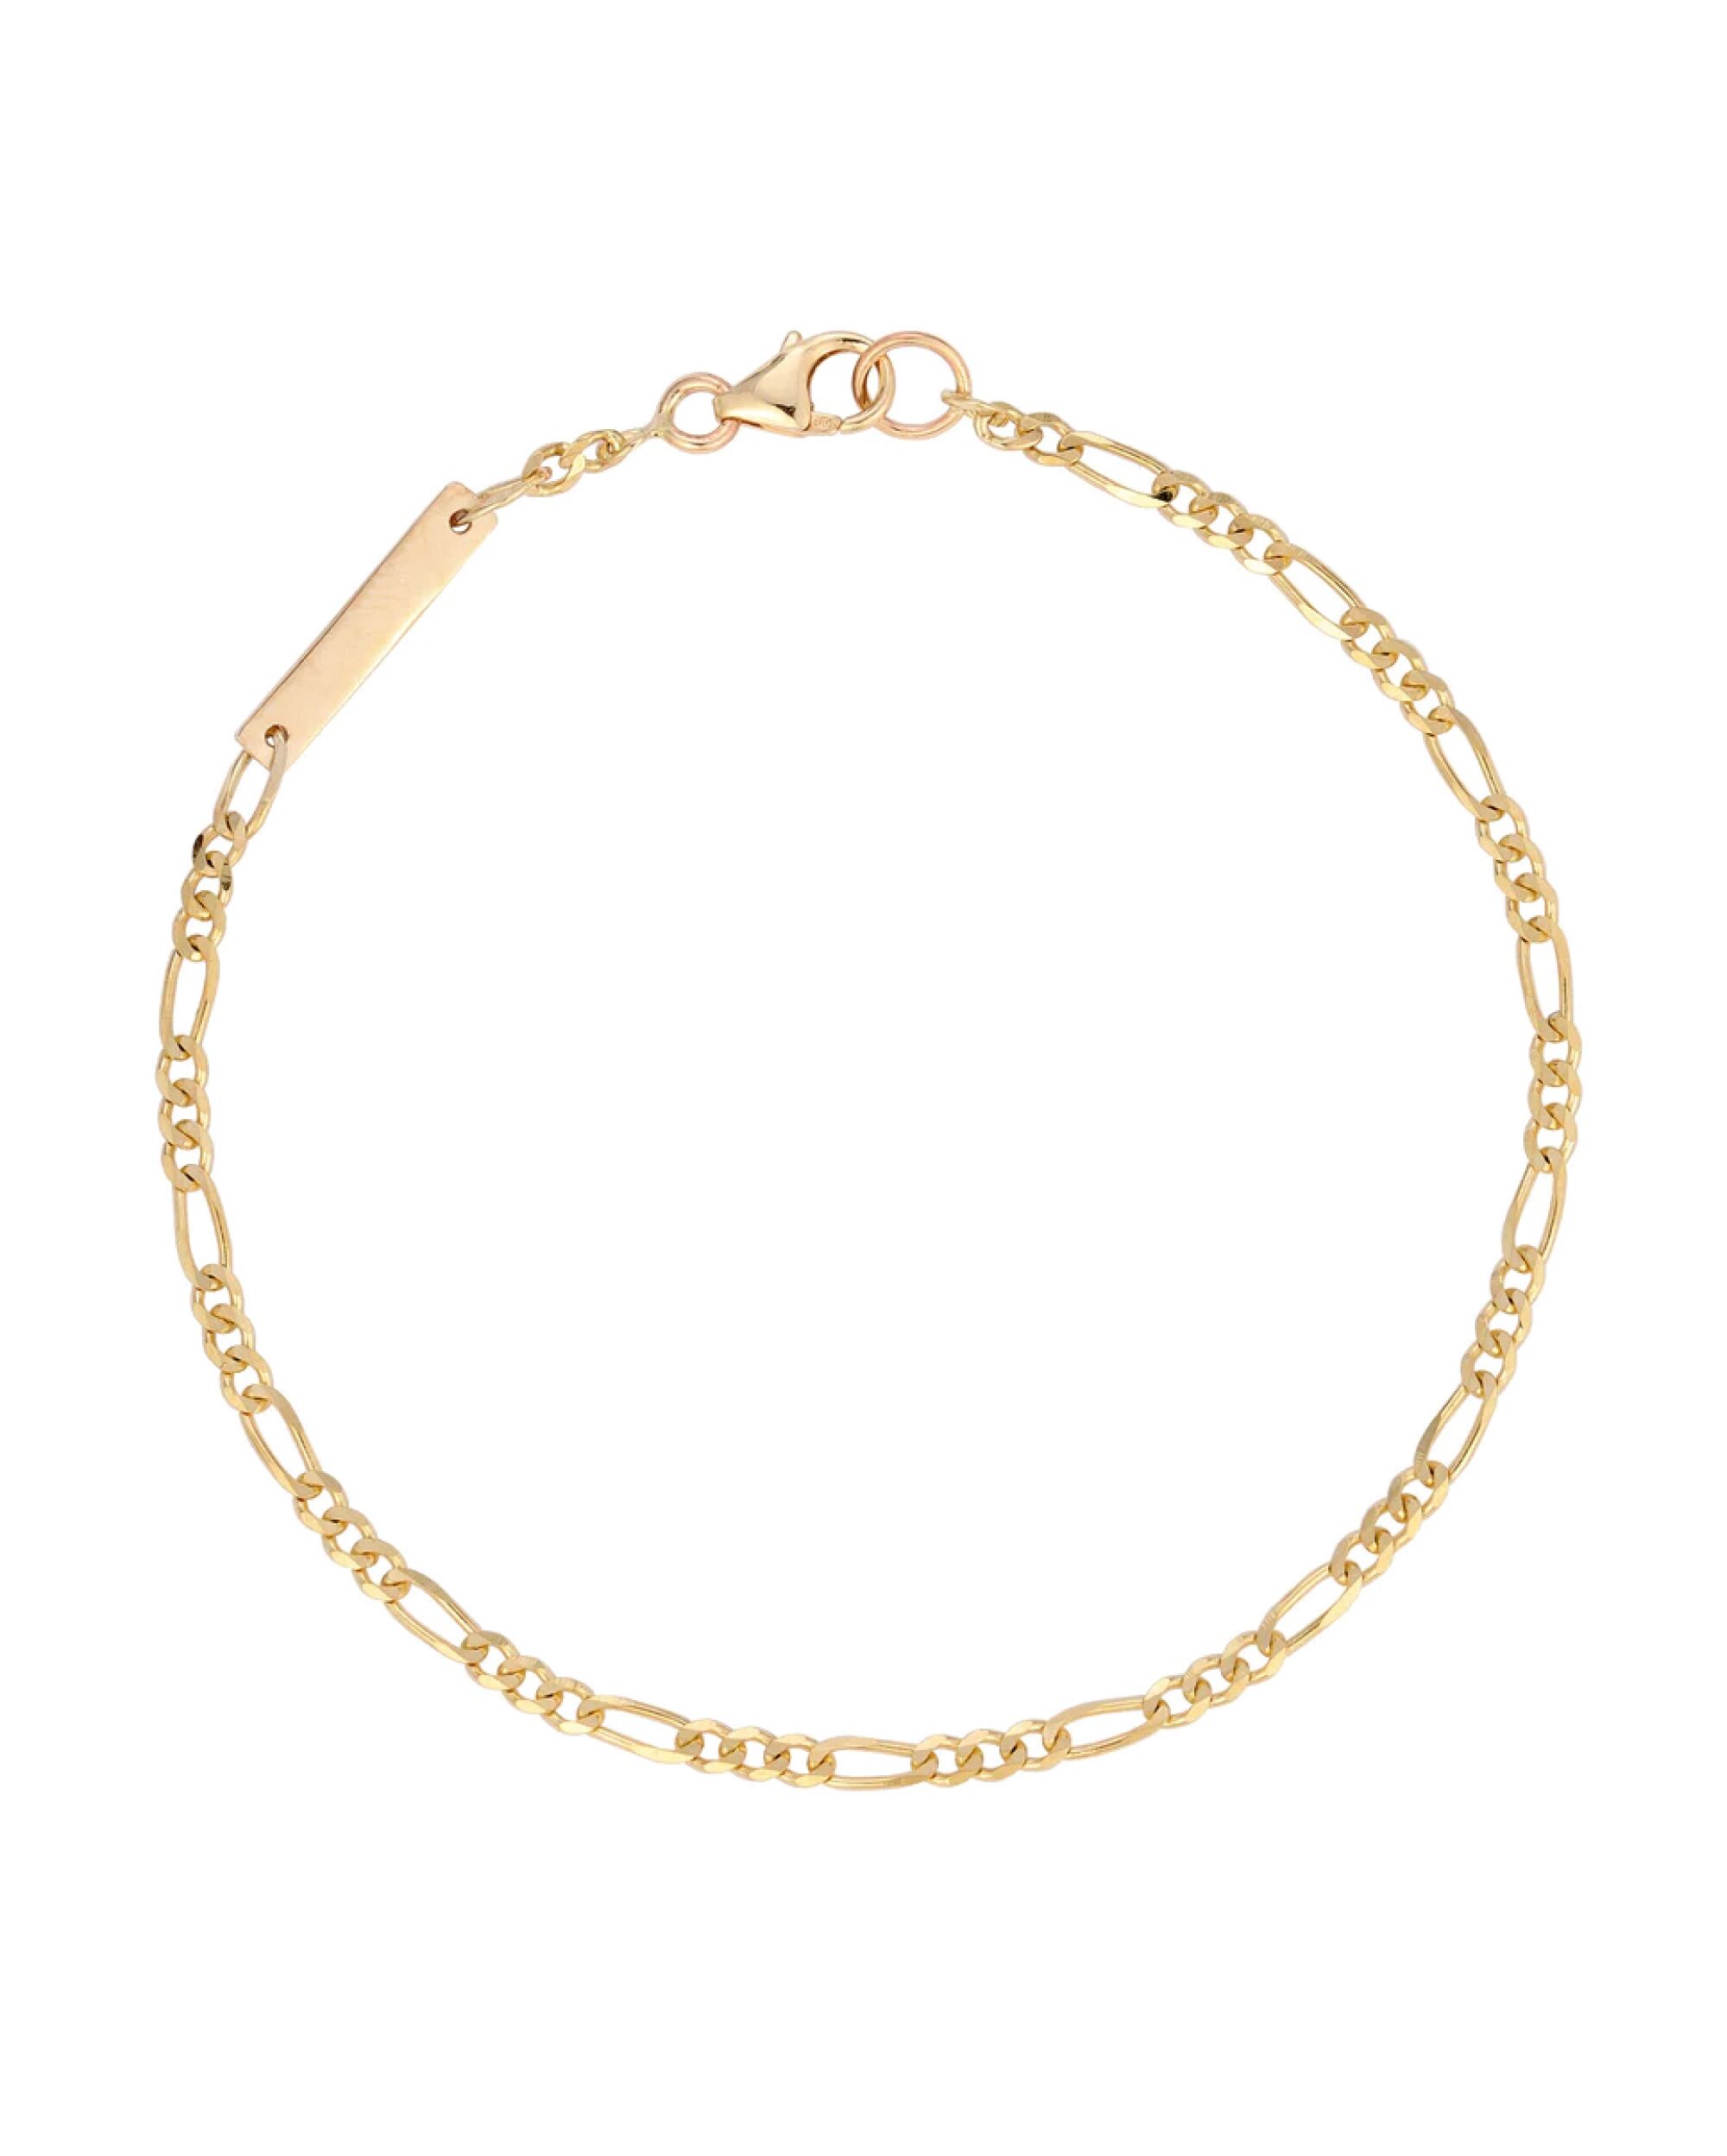 An engraved bar bracelet by Starling Fine Jewelry